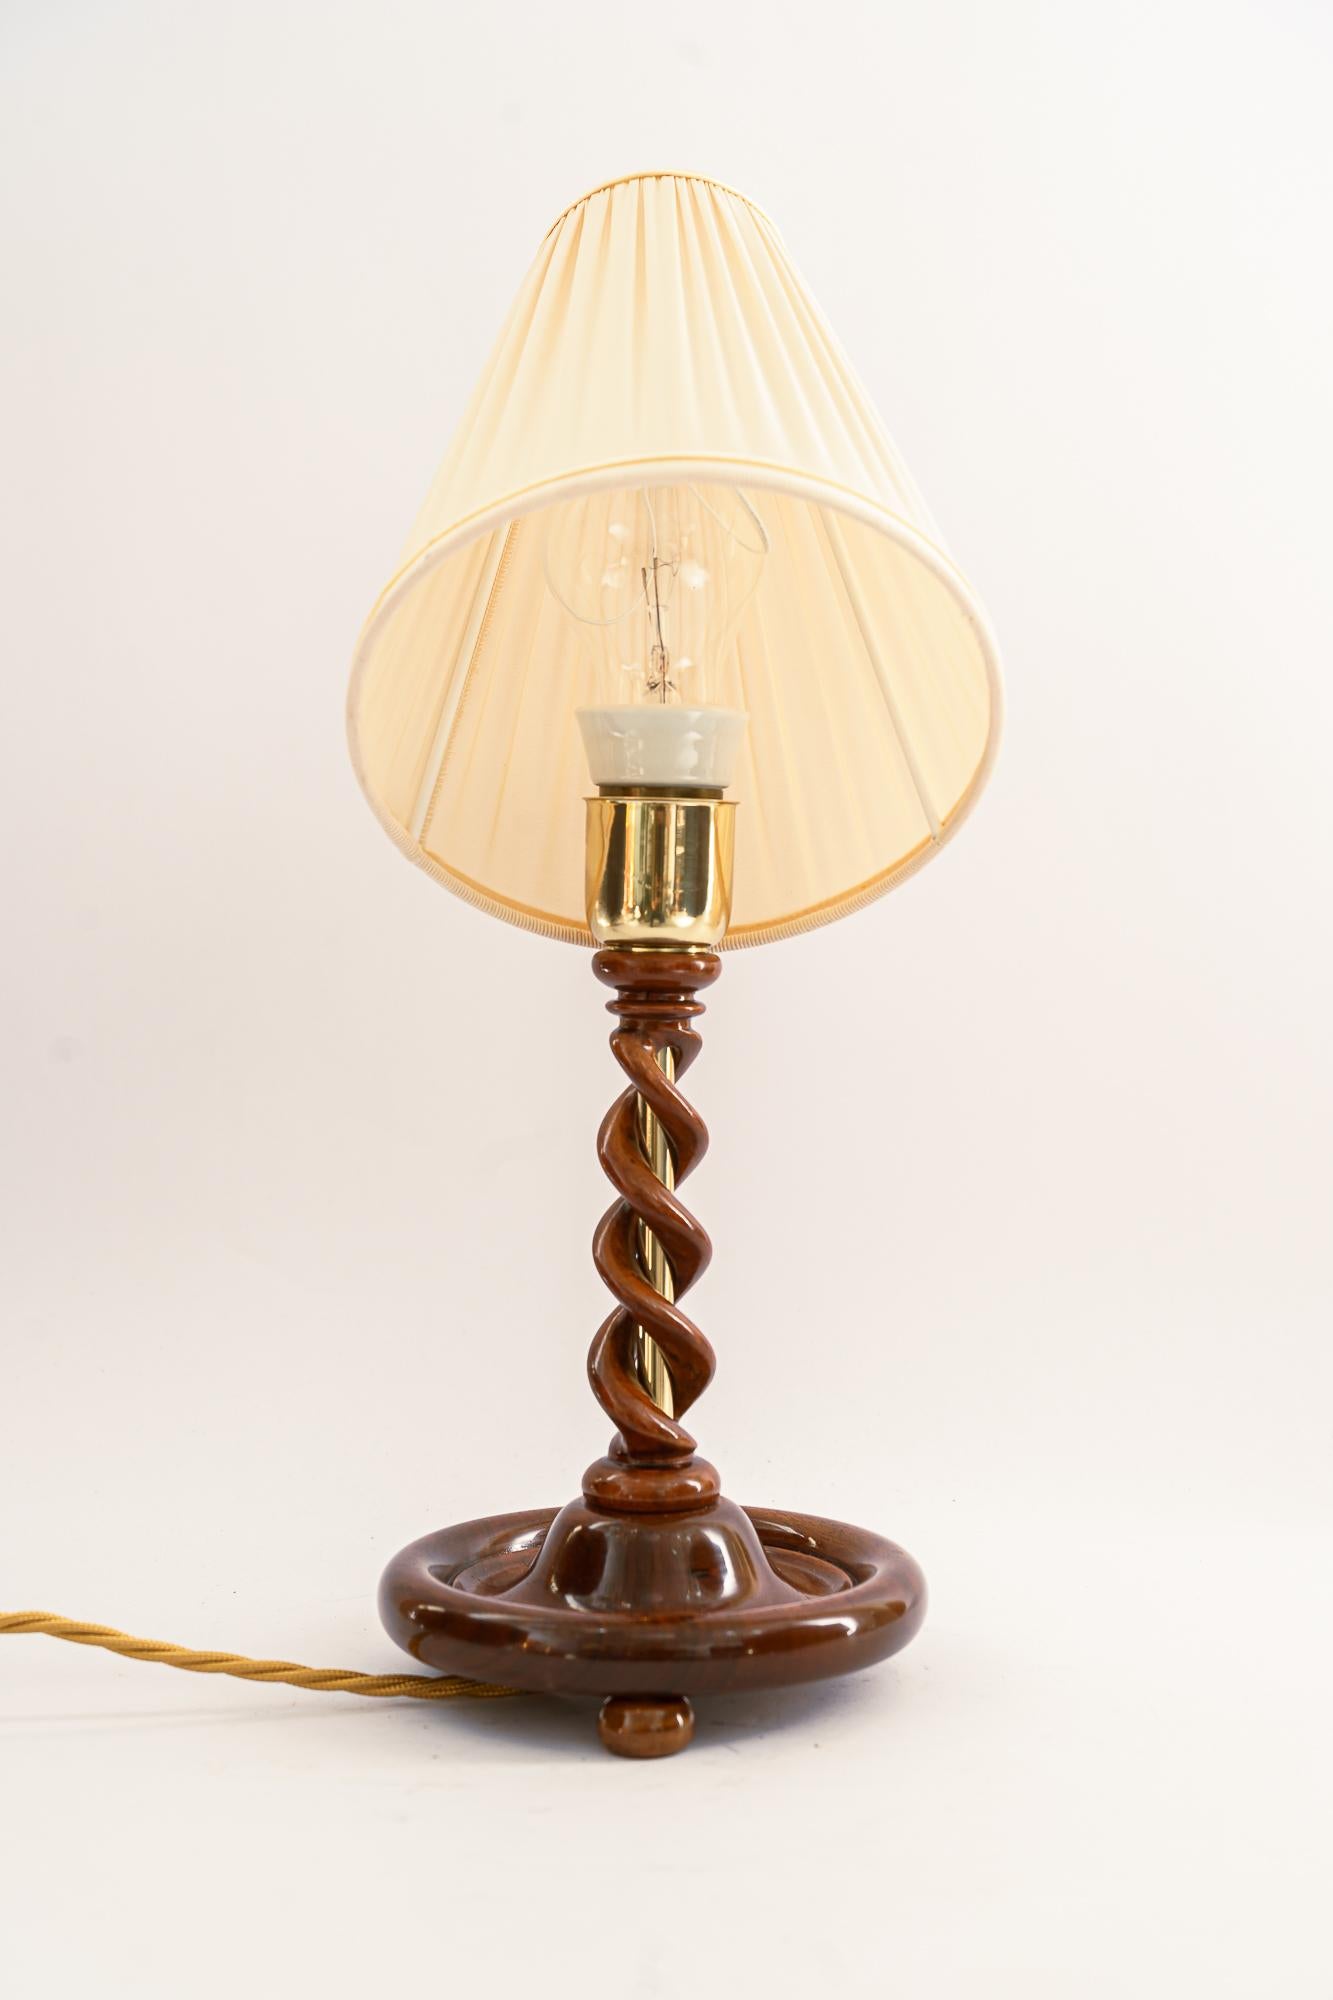 Mid-20th Century Art Deco Wood Lamp with Fabric Shade, Vienna, Around 1920s For Sale